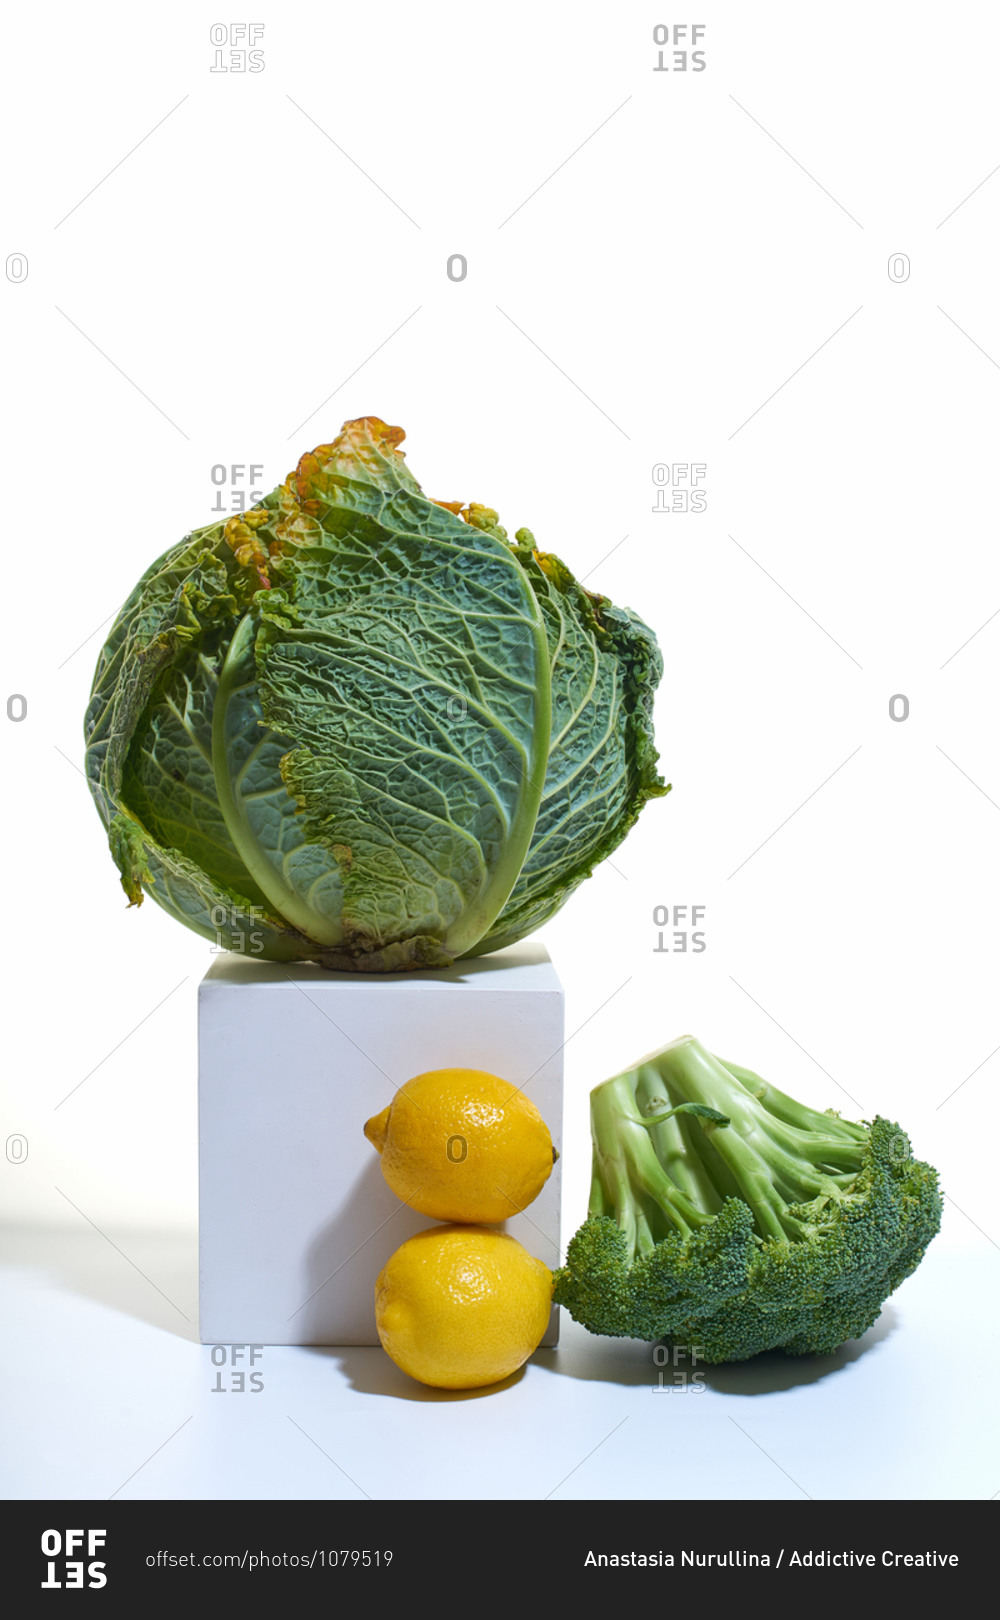 Still life with savoy cabbage, broccoli and lemons